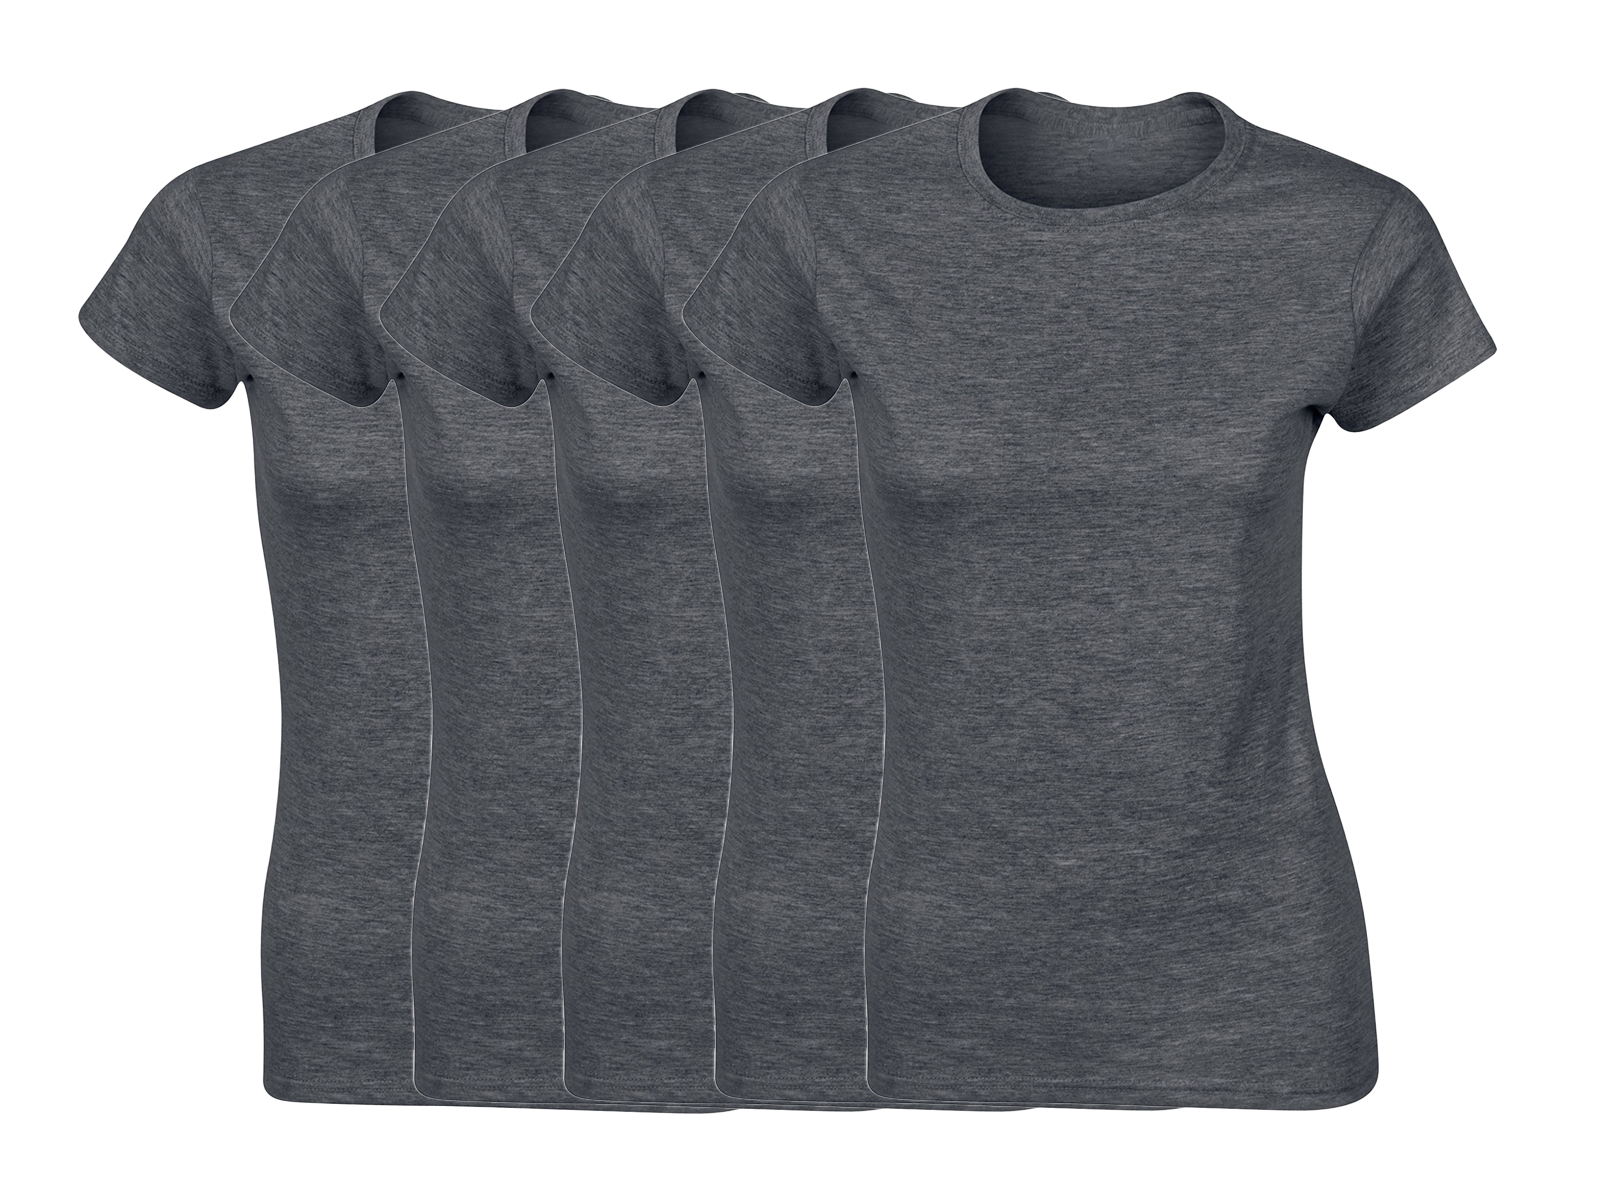 COOZO Ladies Soft Cotton Pack of 5 Plain Short Sleeve T-Shirts - COOZO